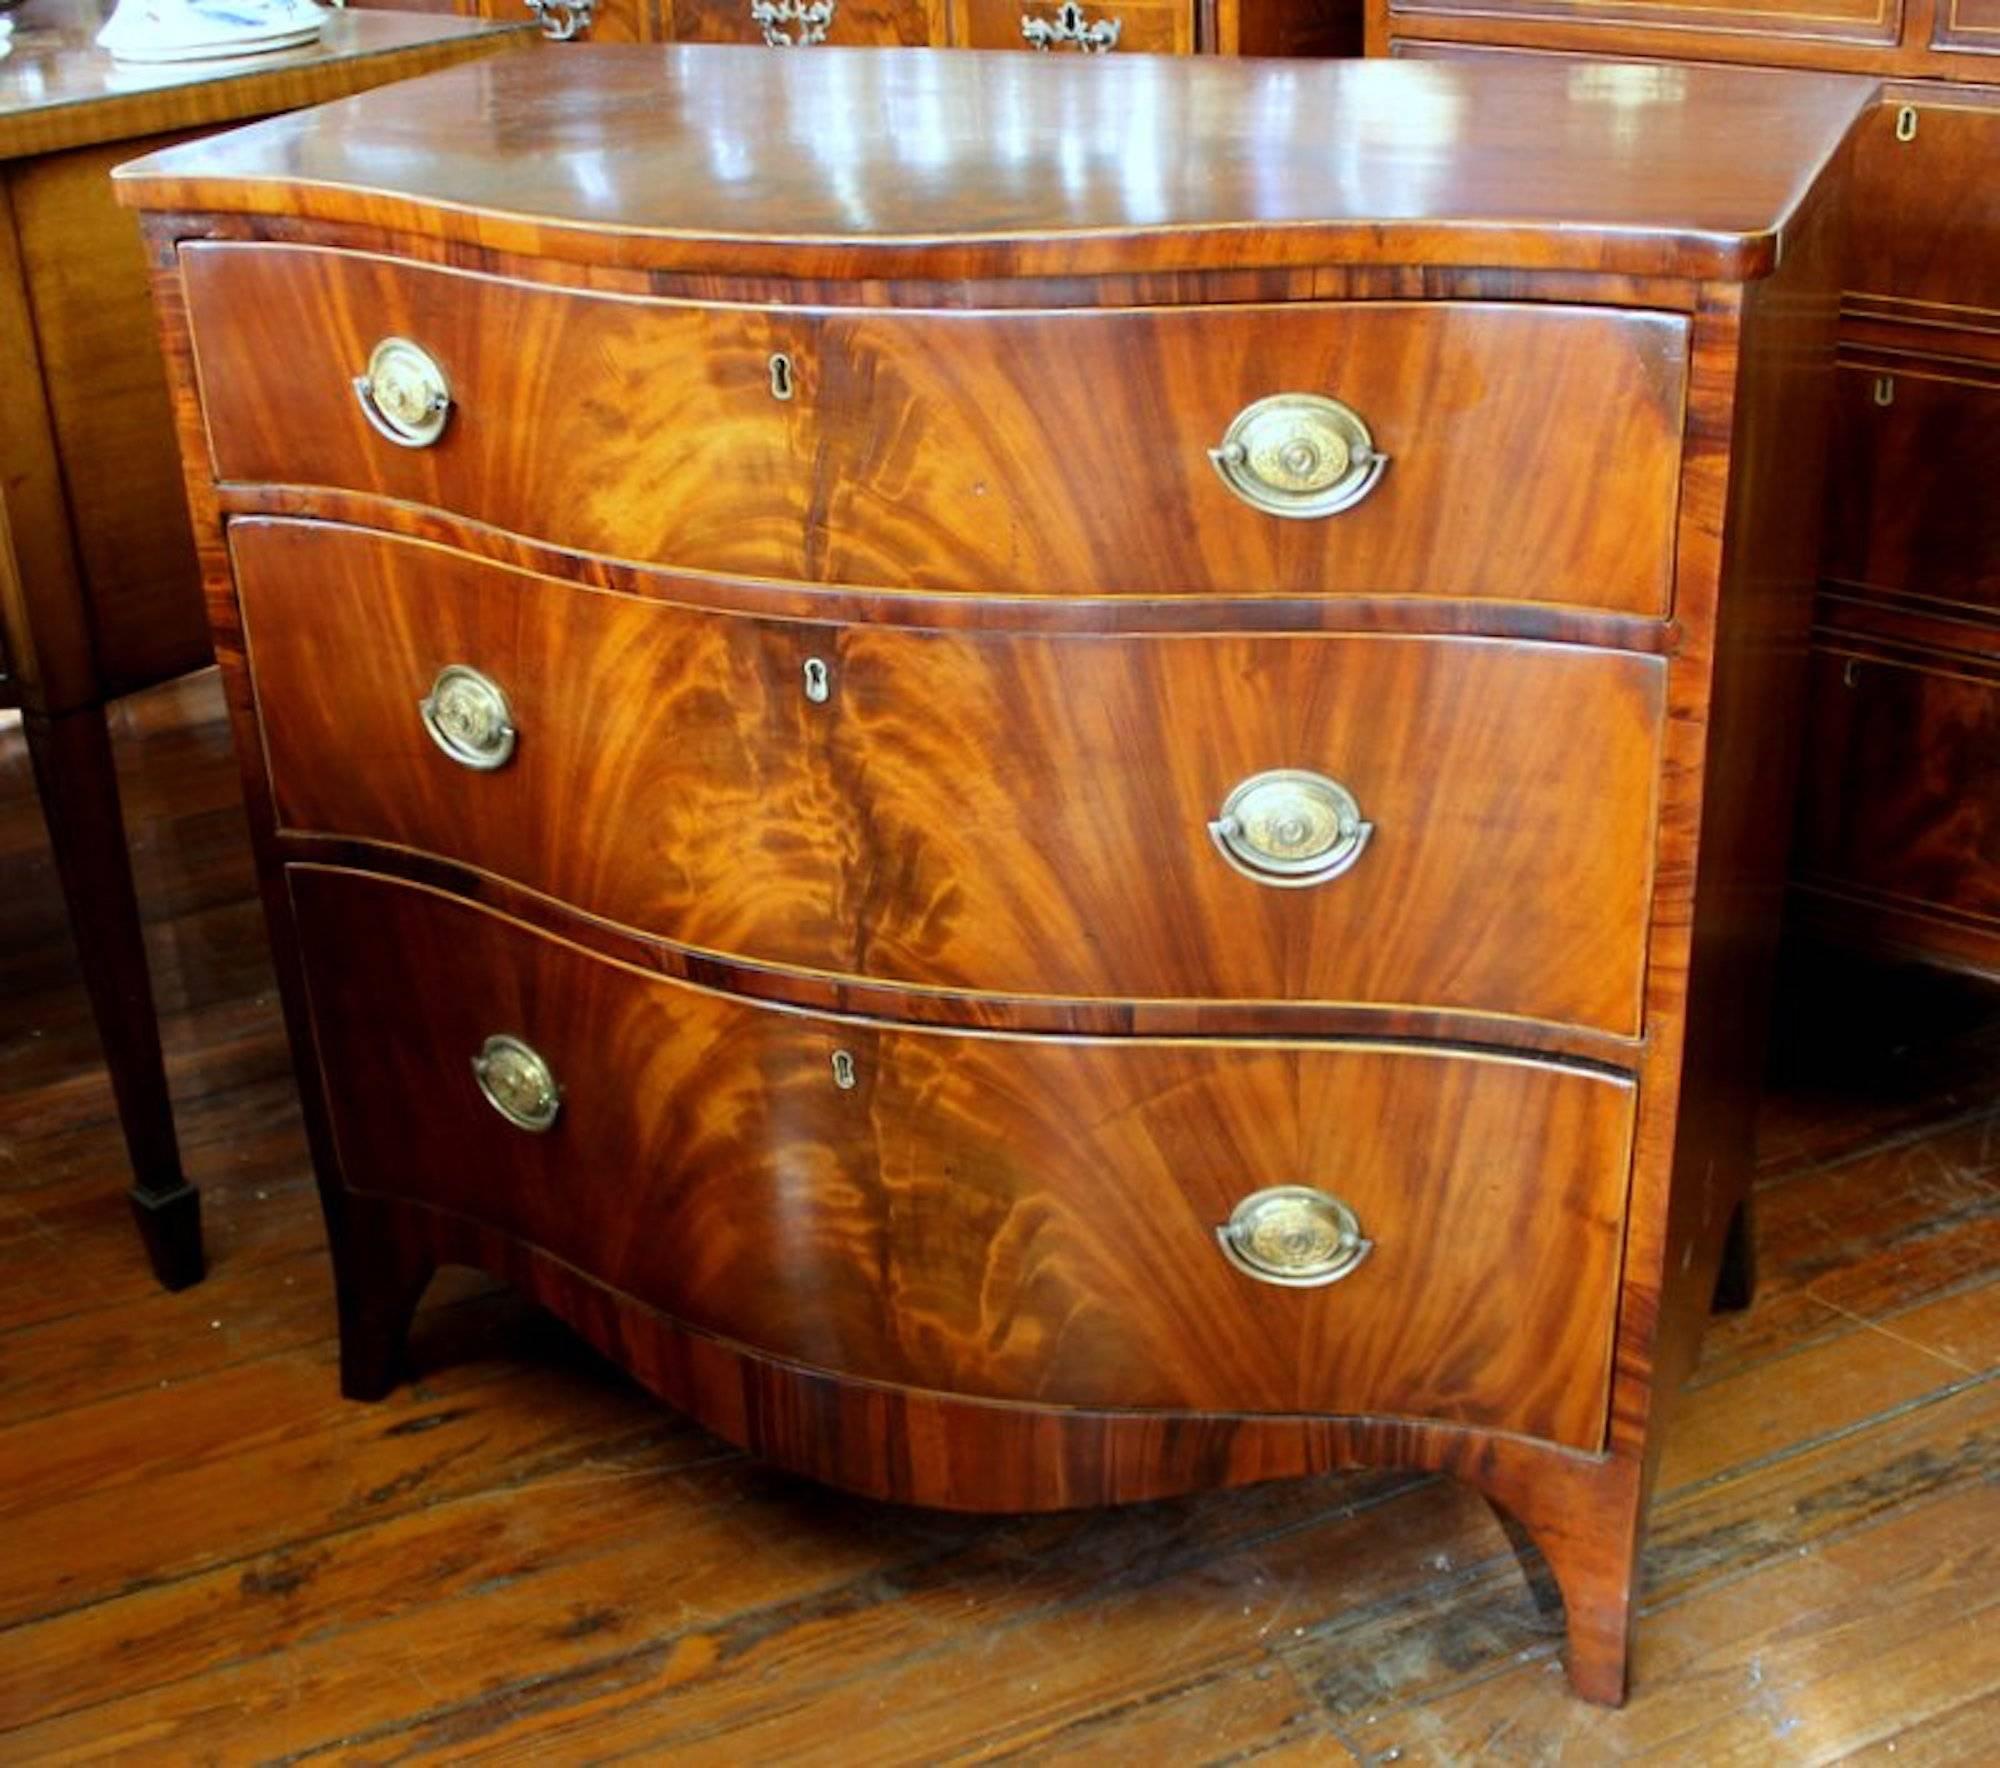 Fabulous and rare antique English George III PERIOD flame or bookmatched figured mahogany Hepplewhite style serpentine chest of drawers

Oval ormolu brasses are antique. 

Please note holly line inlay around edge of top and drawers.
(A couple of old